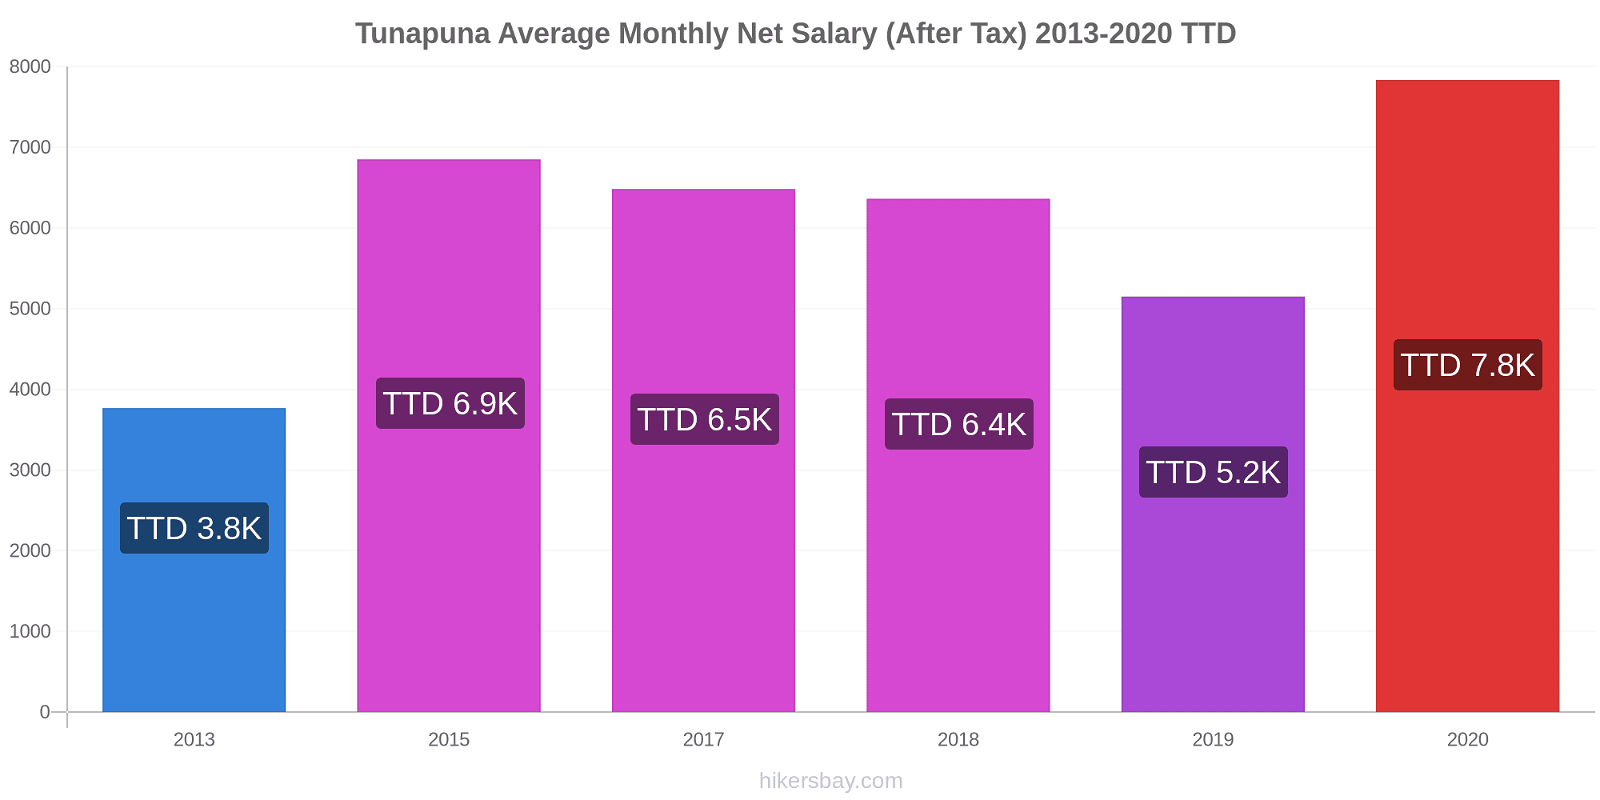 Tunapuna price changes Average Monthly Net Salary (After Tax) hikersbay.com